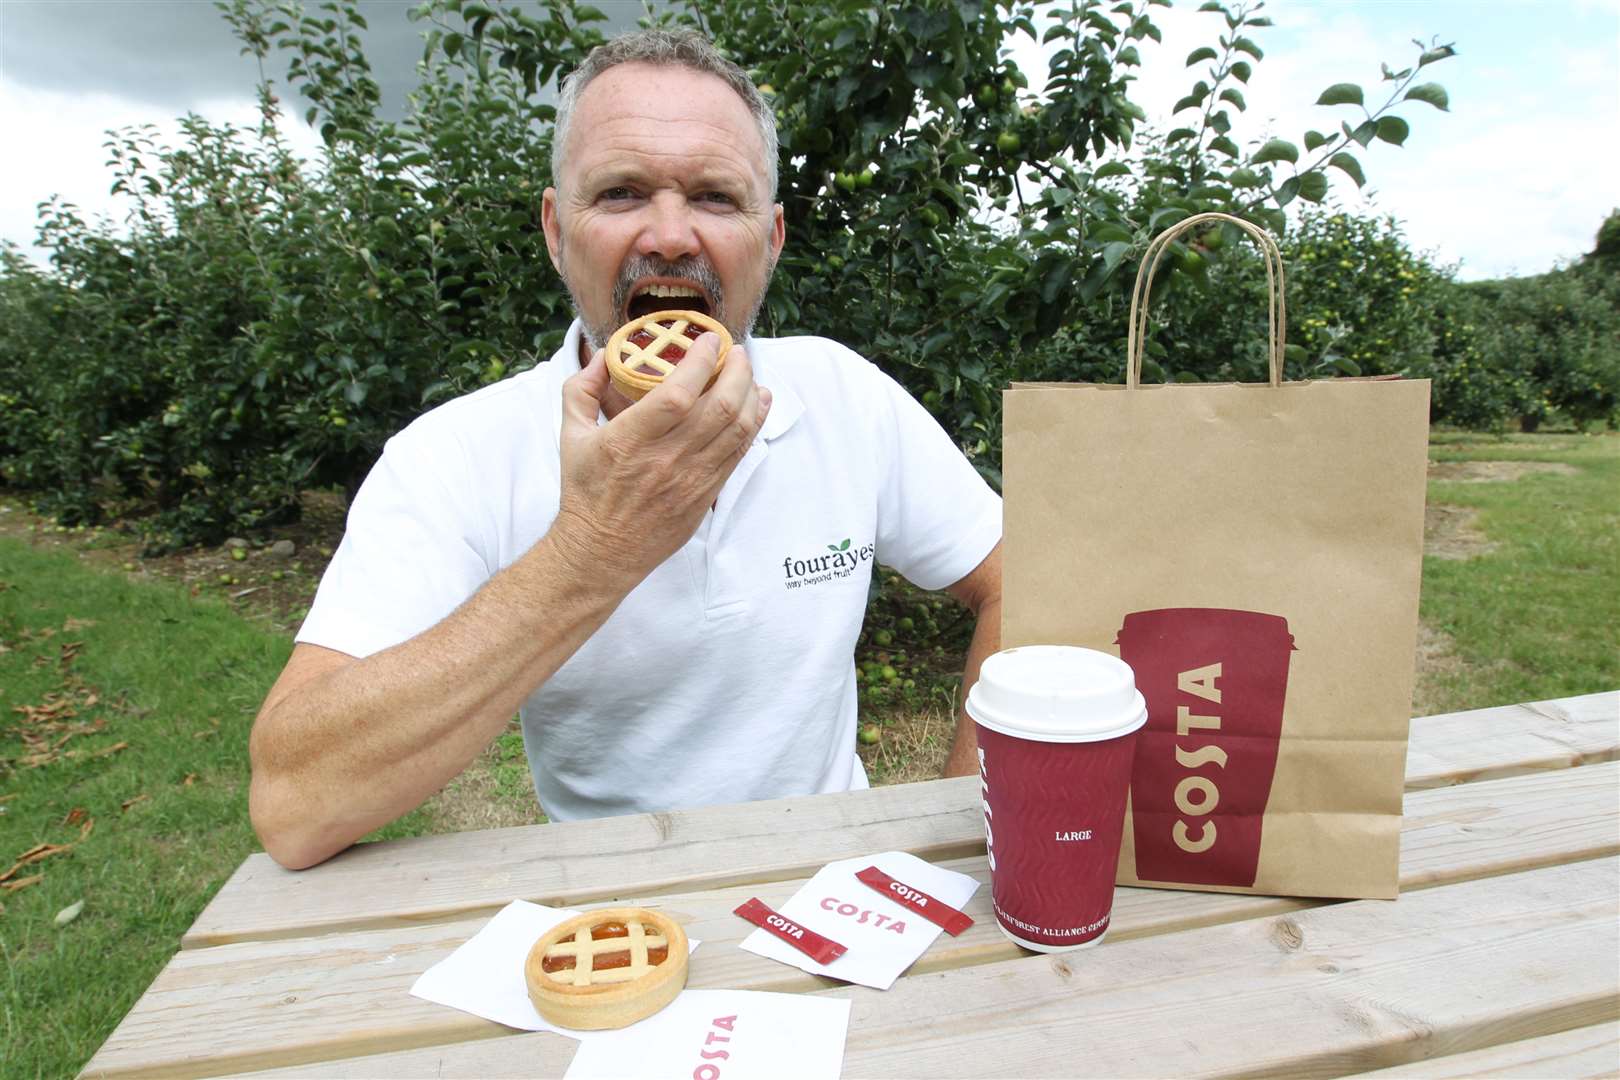 Fourayes managing director Phil Acock munches a strawberry and rhubarb fruit tart his company developed for Costa